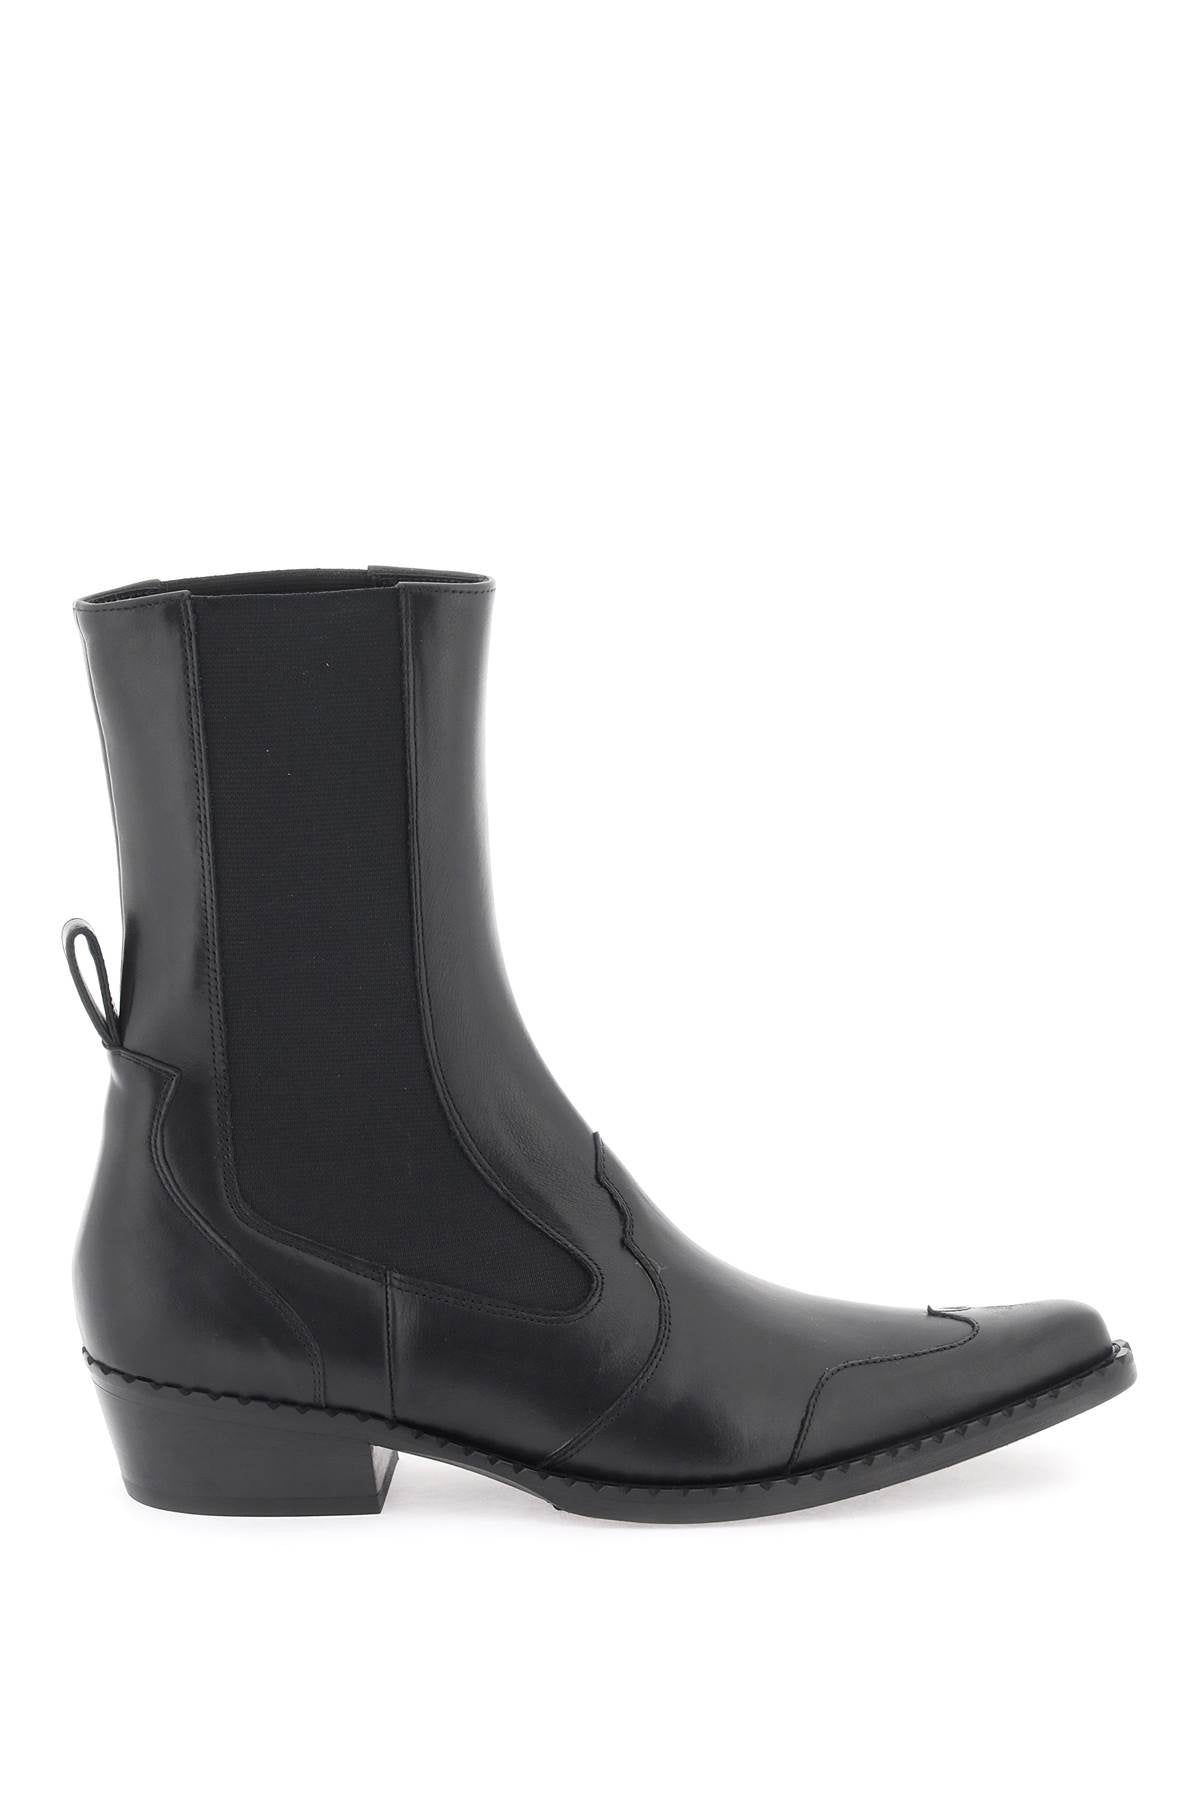 By Far Otis Smooth Leather Chelsea Boots Black